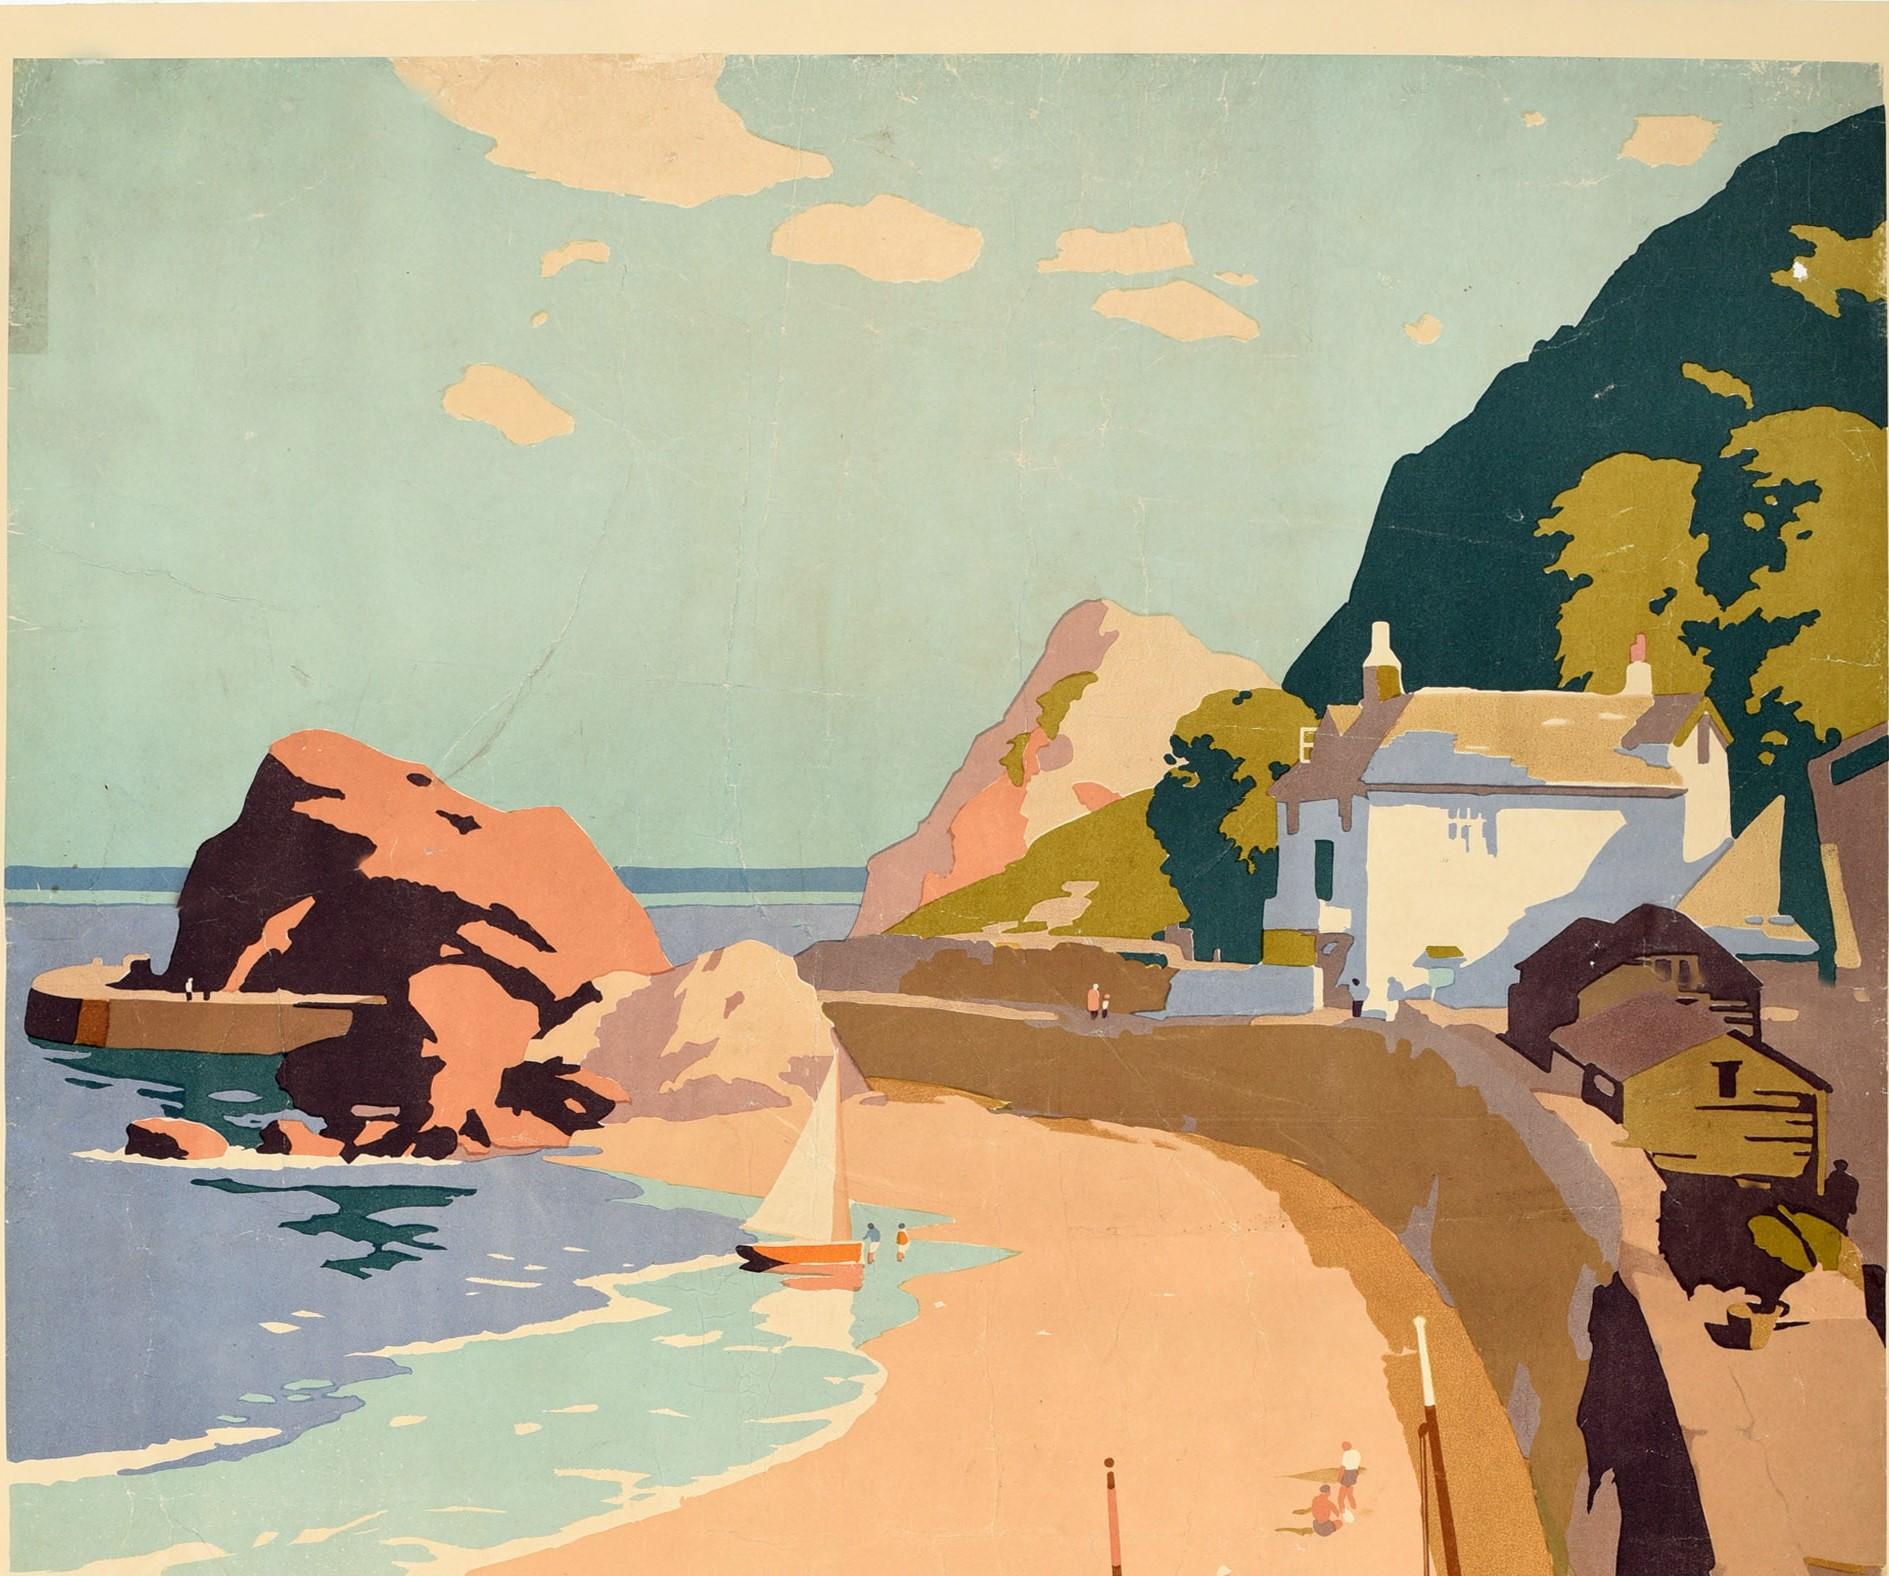 Original vintage railway travel poster for Devon issued by Great Western Railway GWR featuring a great illustration by the notable British poster artist Frank Sherwin (1896-1996) of a beach in Devon with fishing boats in the foreground and a sailing